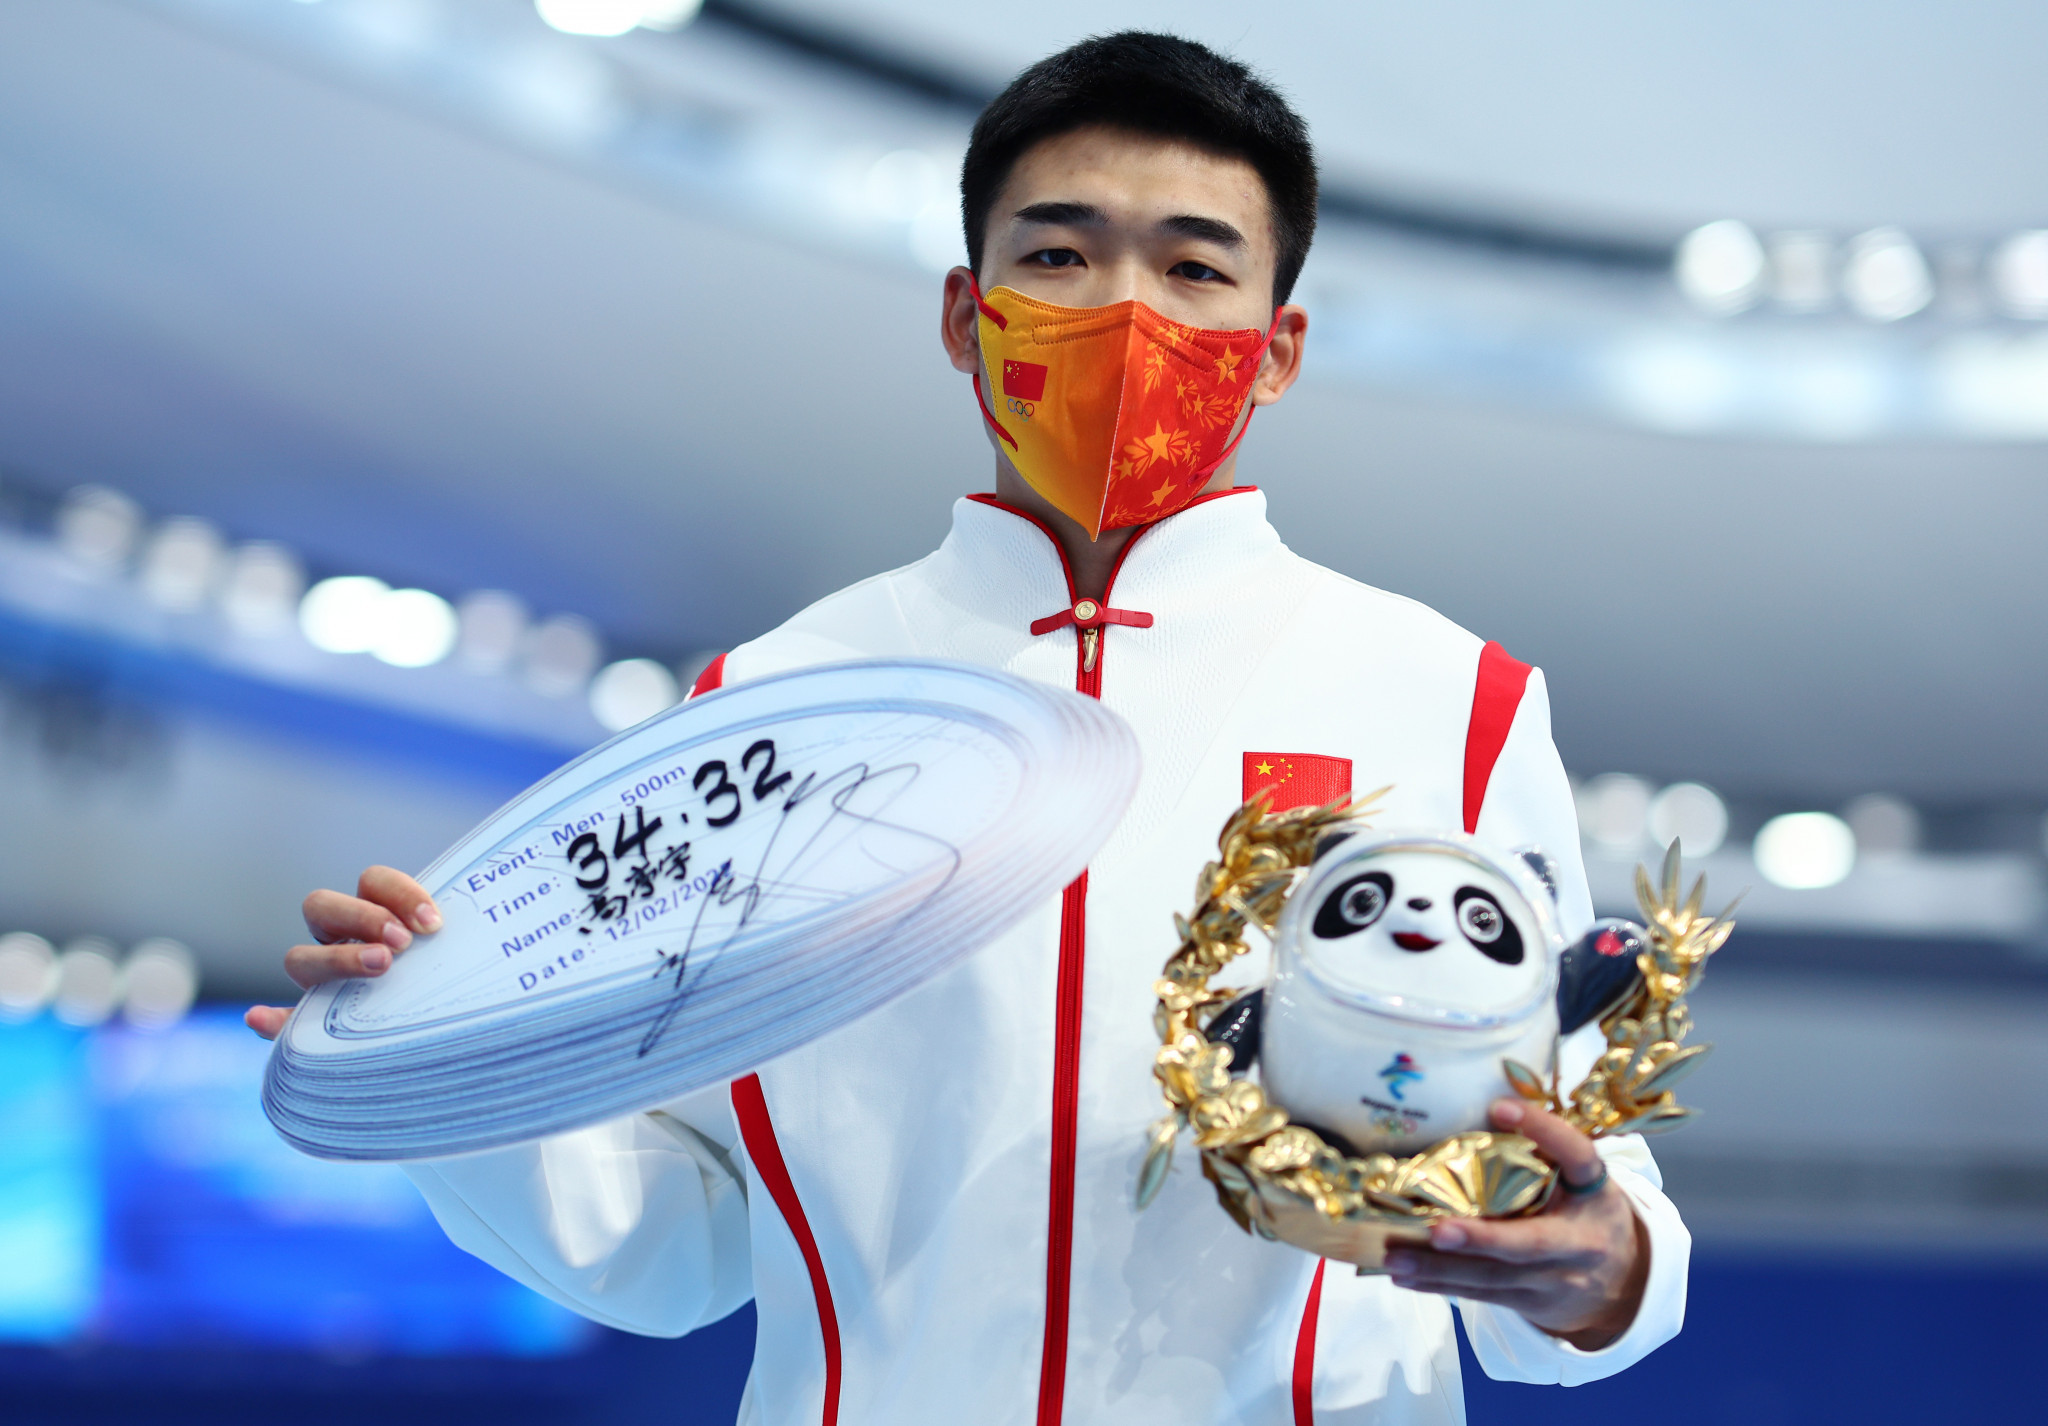 Gao Tingyu is the first Chinese man to win a gold medal in Olympic speed skating ©Getty Images